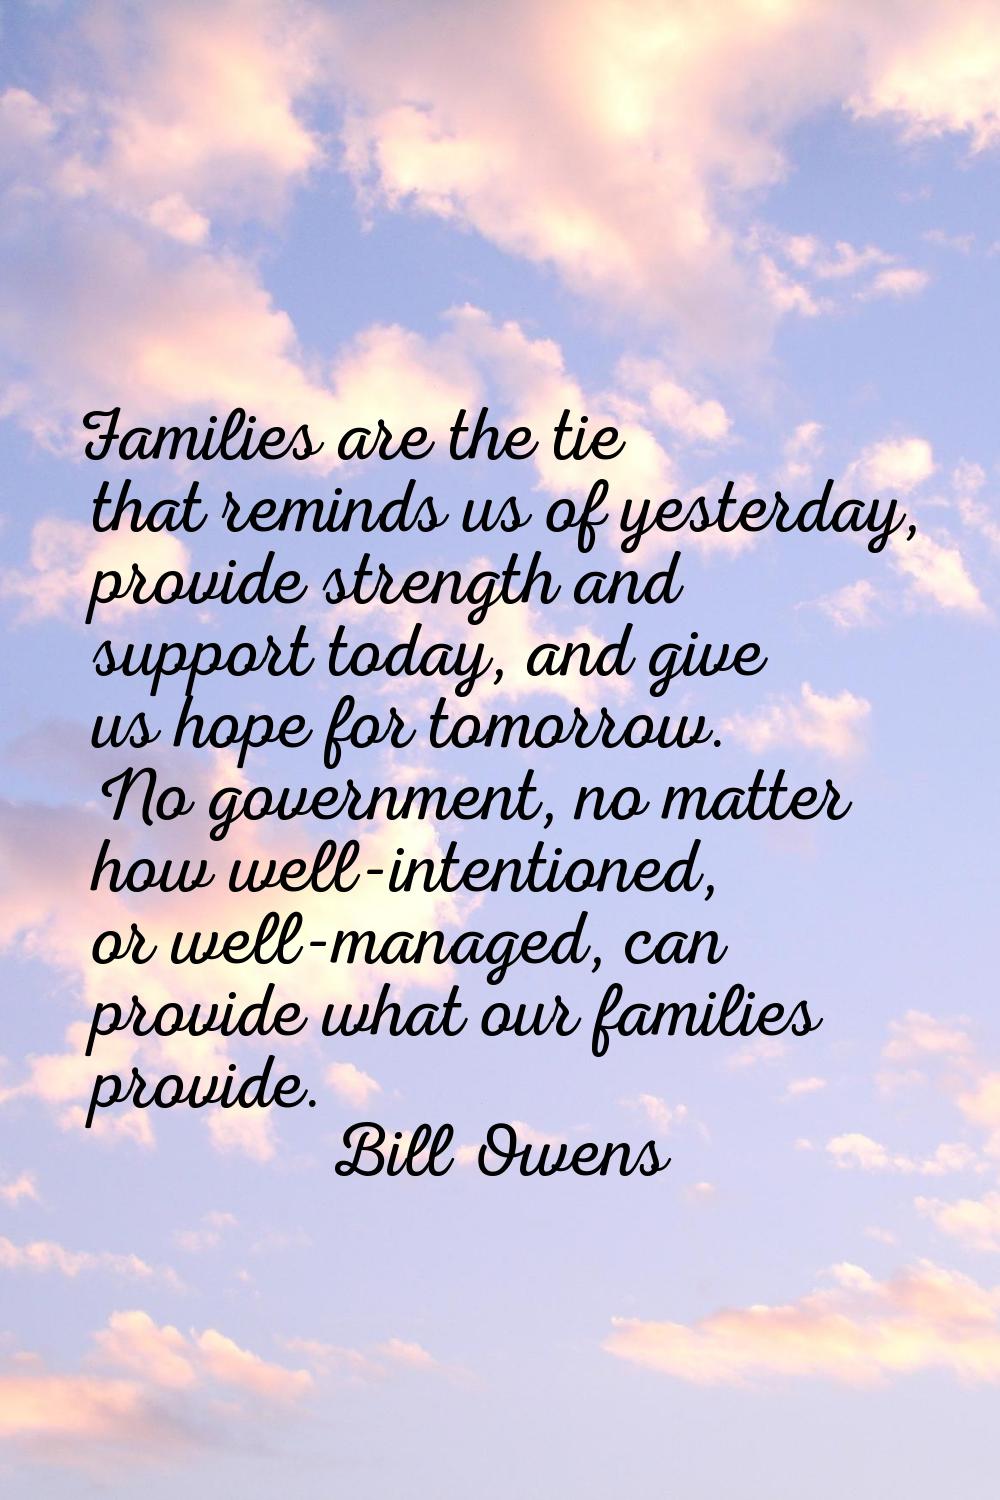 Families are the tie that reminds us of yesterday, provide strength and support today, and give us 